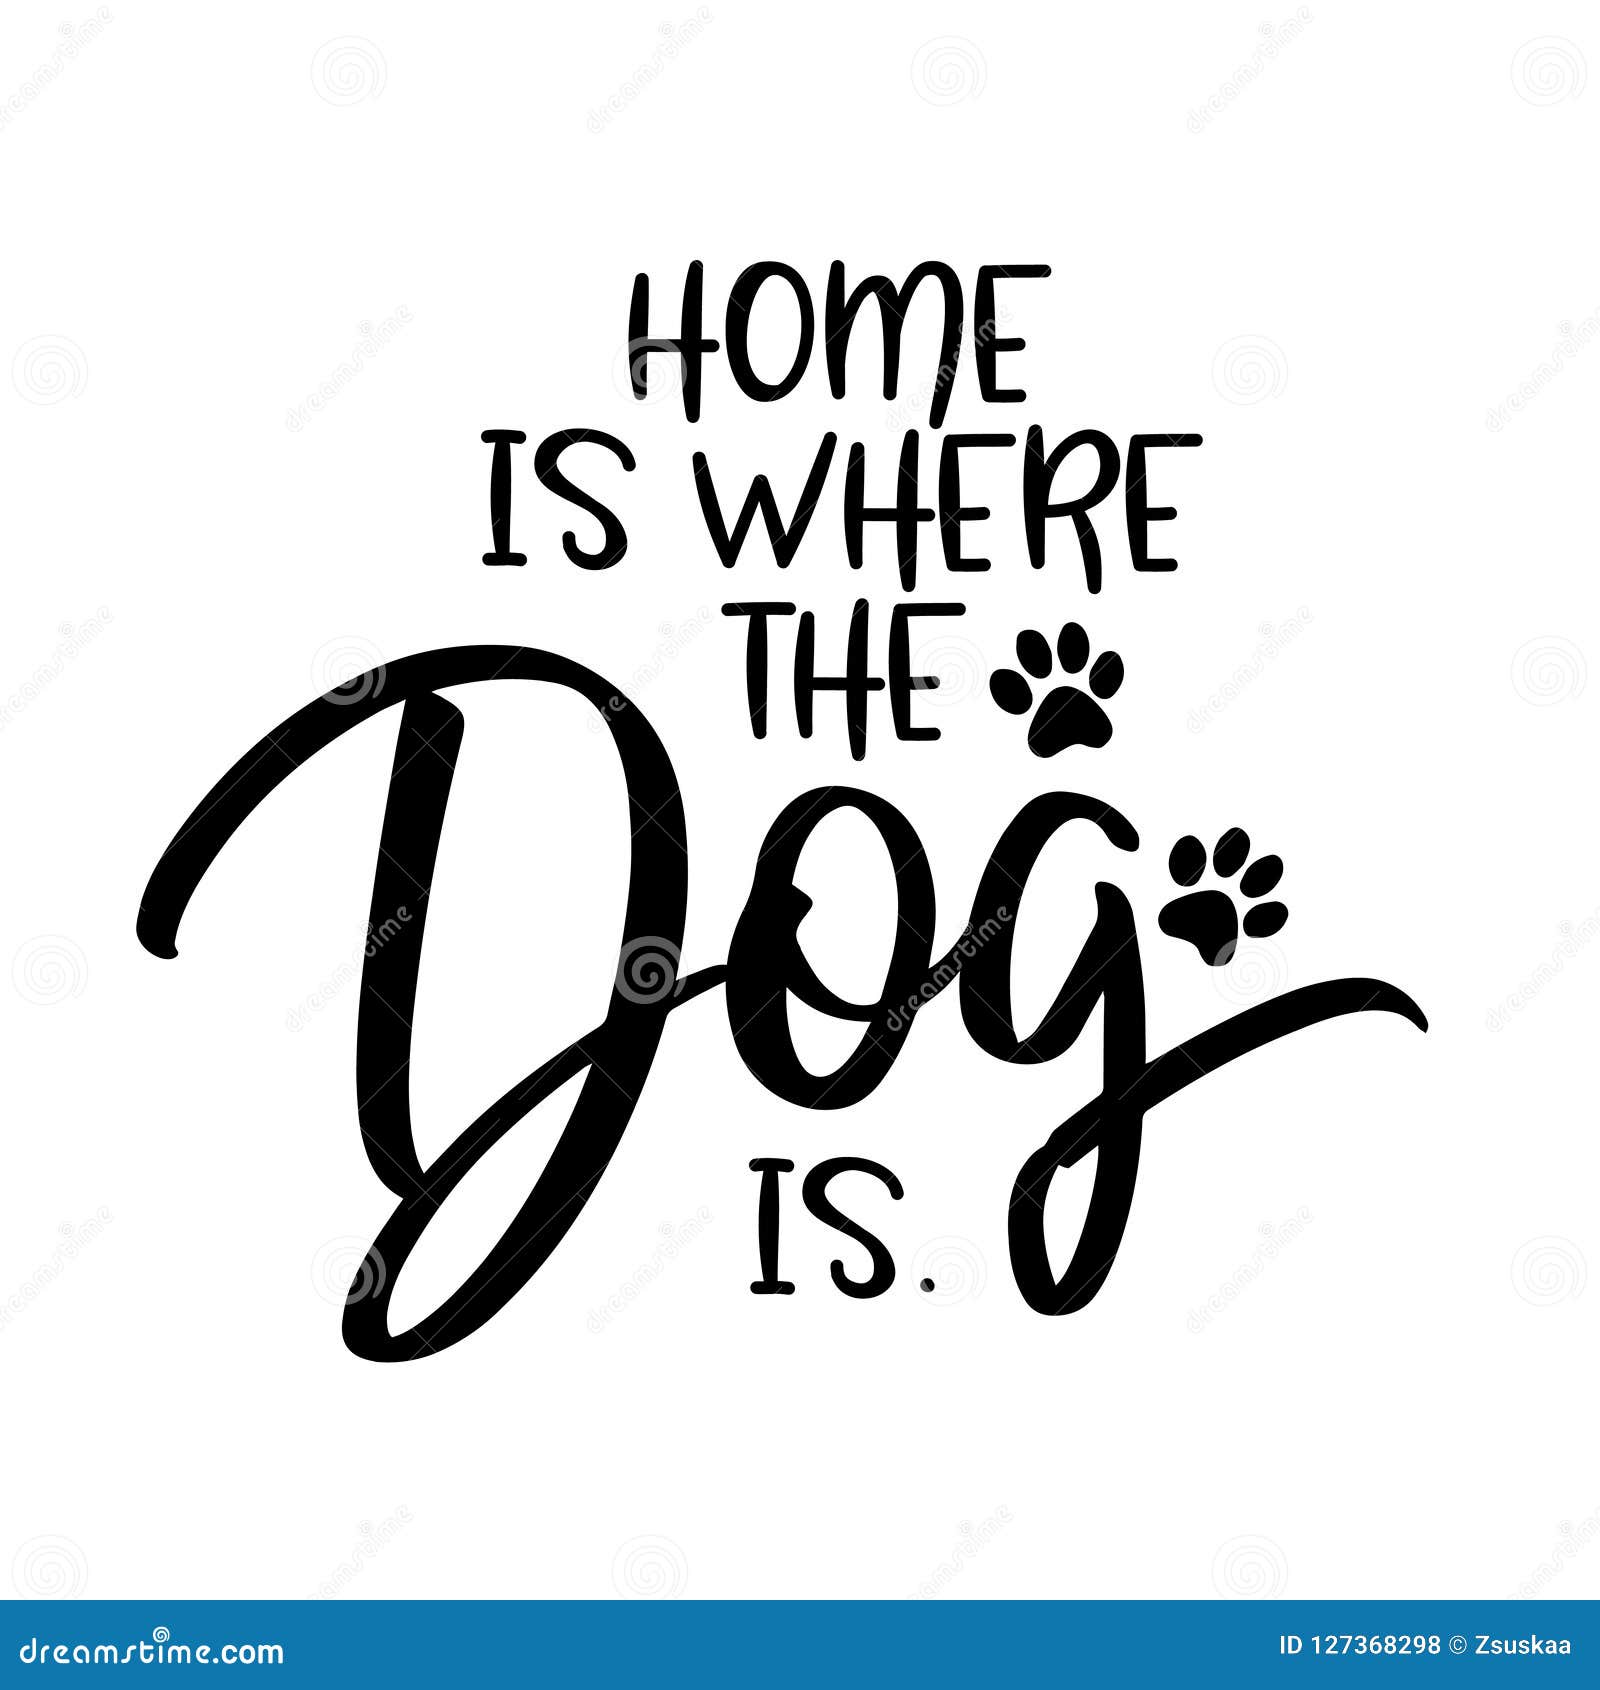 home is where the dog is.